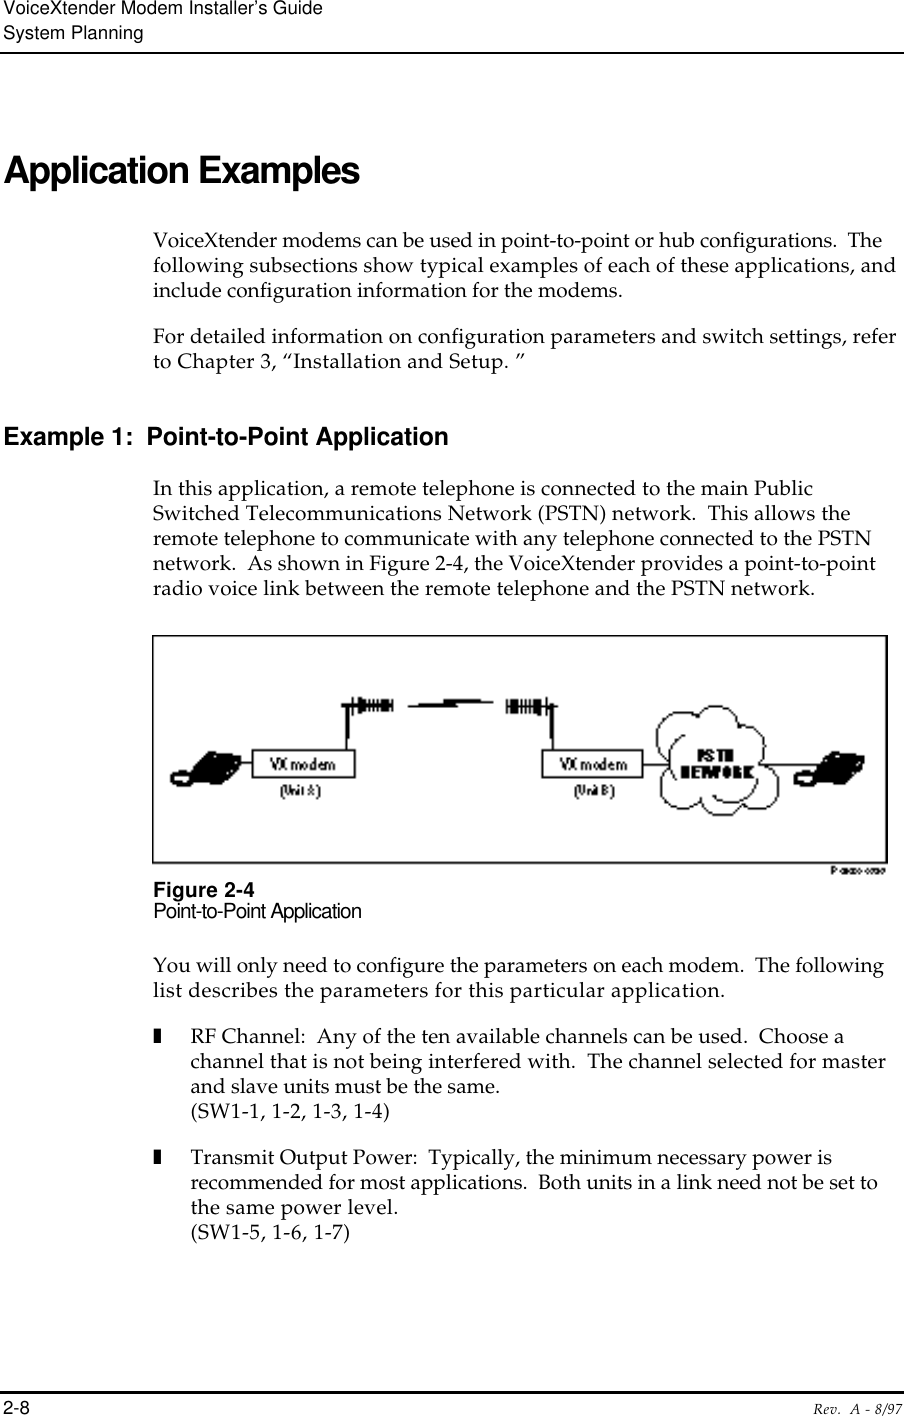 VoiceXtender Modem Installer’s GuideSystem Planning2-8 Rev.  A - 8/97Application ExamplesVoiceXtender modems can be used in point-to-point or hub configurations.  Thefollowing subsections show typical examples of each of these applications, andinclude configuration information for the modems.  For detailed information on configuration parameters and switch settings, referto Chapter 3, “Installation and Setup. ”Example 1:  Point-to-Point ApplicationIn this application, a remote telephone is connected to the main PublicSwitched Telecommunications Network (PSTN) network.  This allows theremote telephone to communicate with any telephone connected to the PSTNnetwork.  As shown in Figure 2-4, the VoiceXtender provides a point-to-pointradio voice link between the remote telephone and the PSTN network.Figure 2-4Point-to-Point ApplicationYou will only need to configure the parameters on each modem.  The followinglist describes the parameters for this particular application.❚RF Channel:  Any of the ten available channels can be used.  Choose achannel that is not being interfered with.  The channel selected for masterand slave units must be the same.(SW1-1, 1-2, 1-3, 1-4)❚Transmit Output Power:  Typically, the minimum necessary power isrecommended for most applications.  Both units in a link need not be set tothe same power level.(SW1-5, 1-6, 1-7)